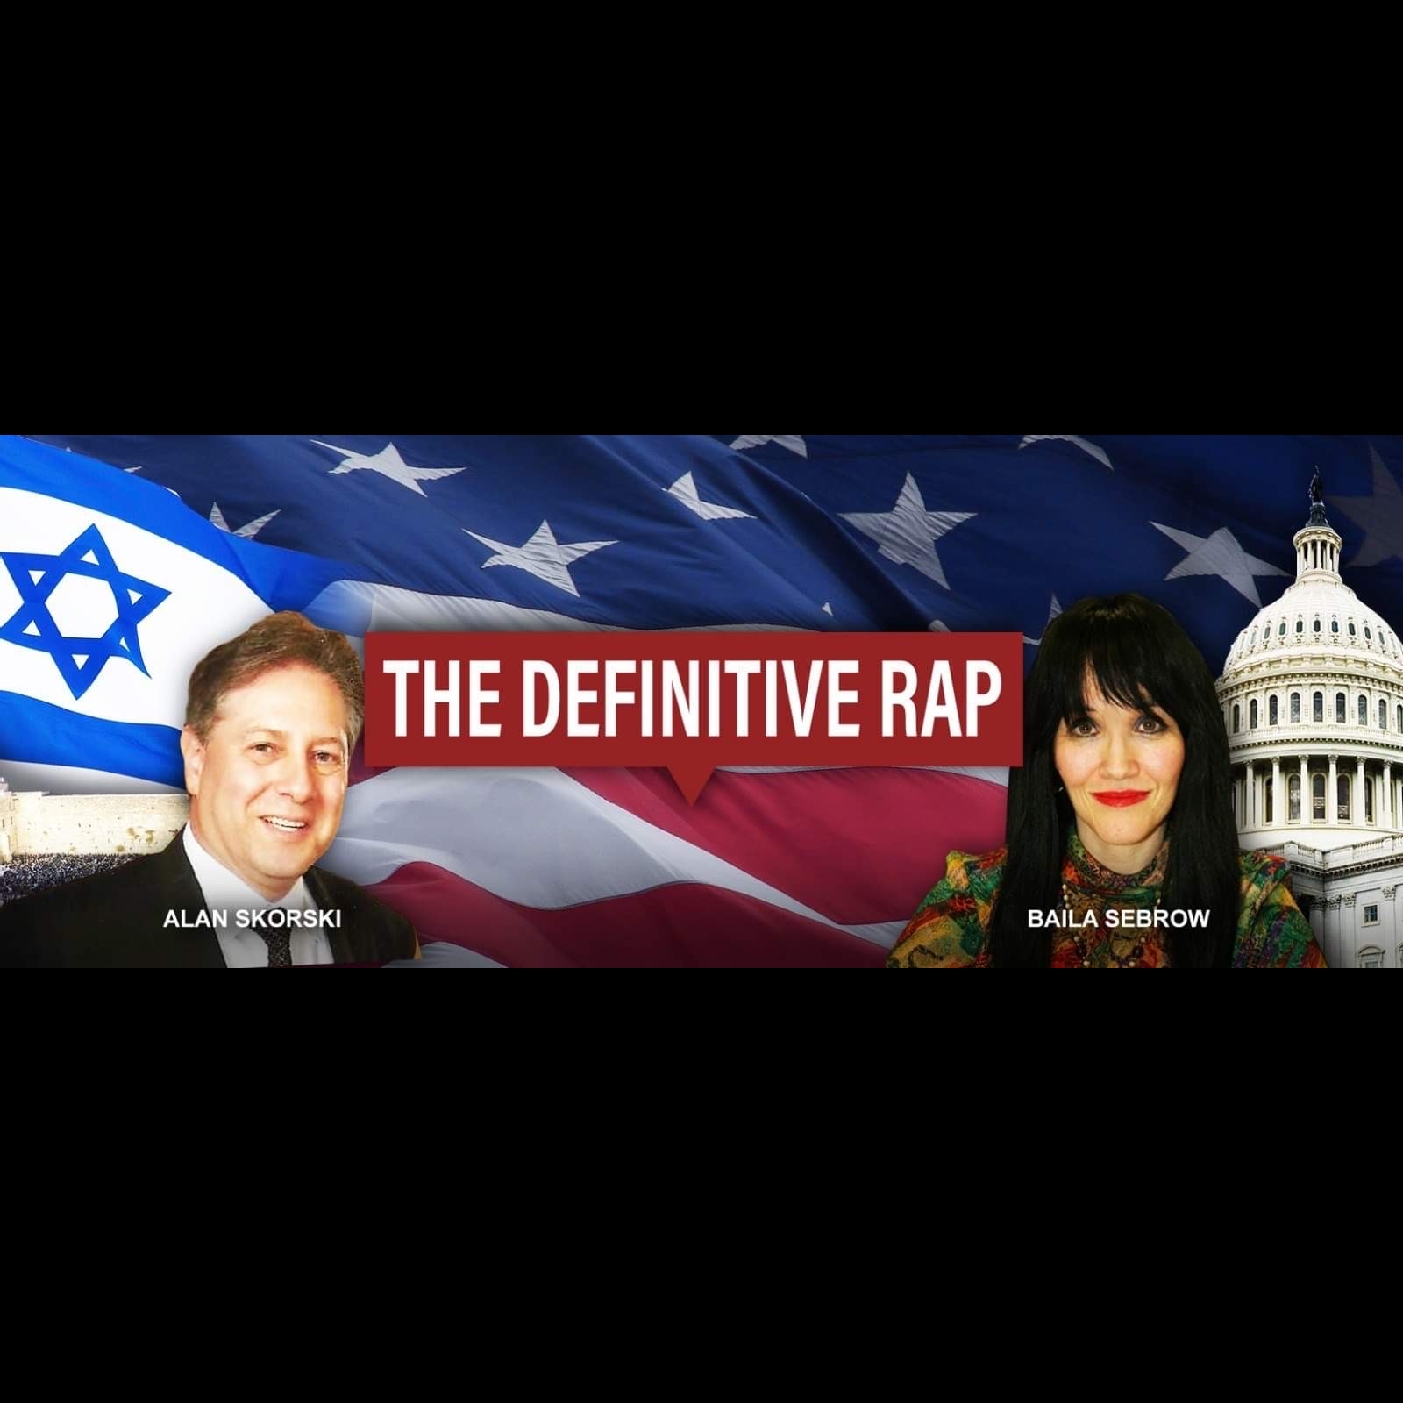 1/07/21 Interview with world renowned Attorney, Nat Lewin, discussing his column criticizing Holocaust scholar, Deborah Lipstadt, on her comparing President Trump's questioning the legitimacy of the e